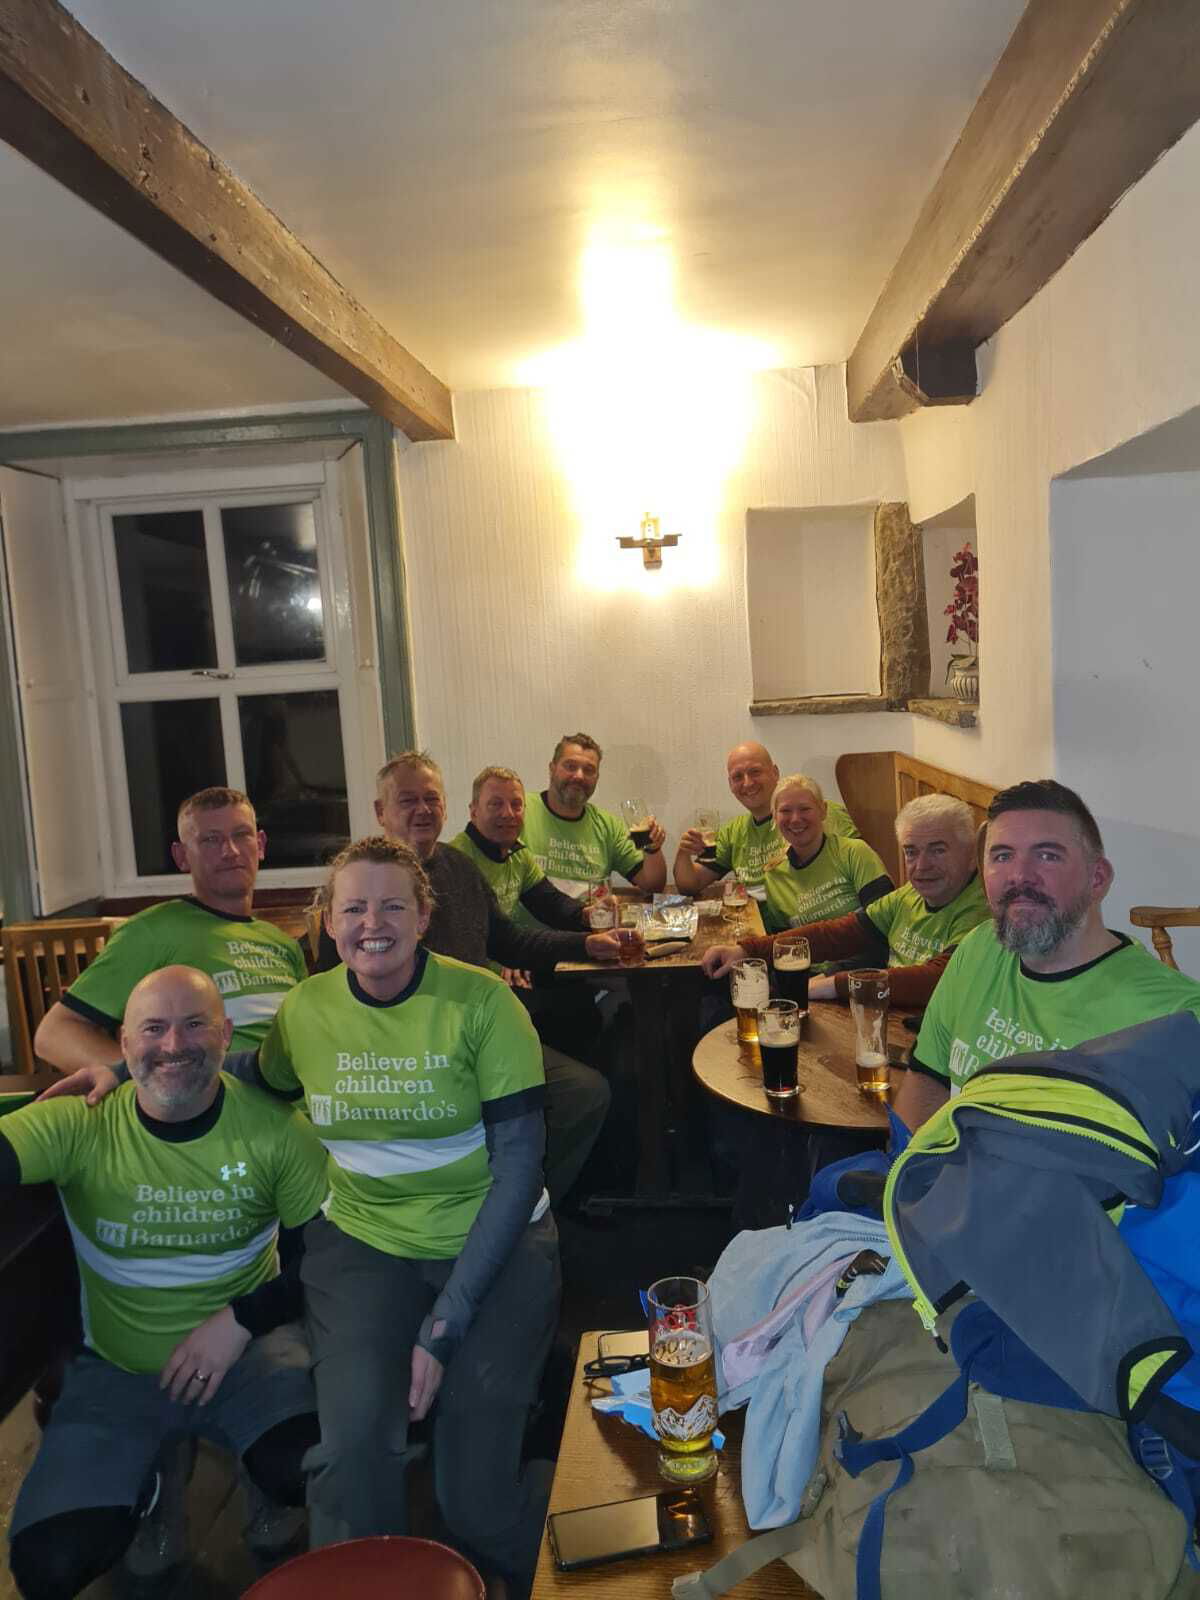 Everyone's buzzing on endorphins, and a pint ~  19:30 Golden Lion Pub ~ a Job well done